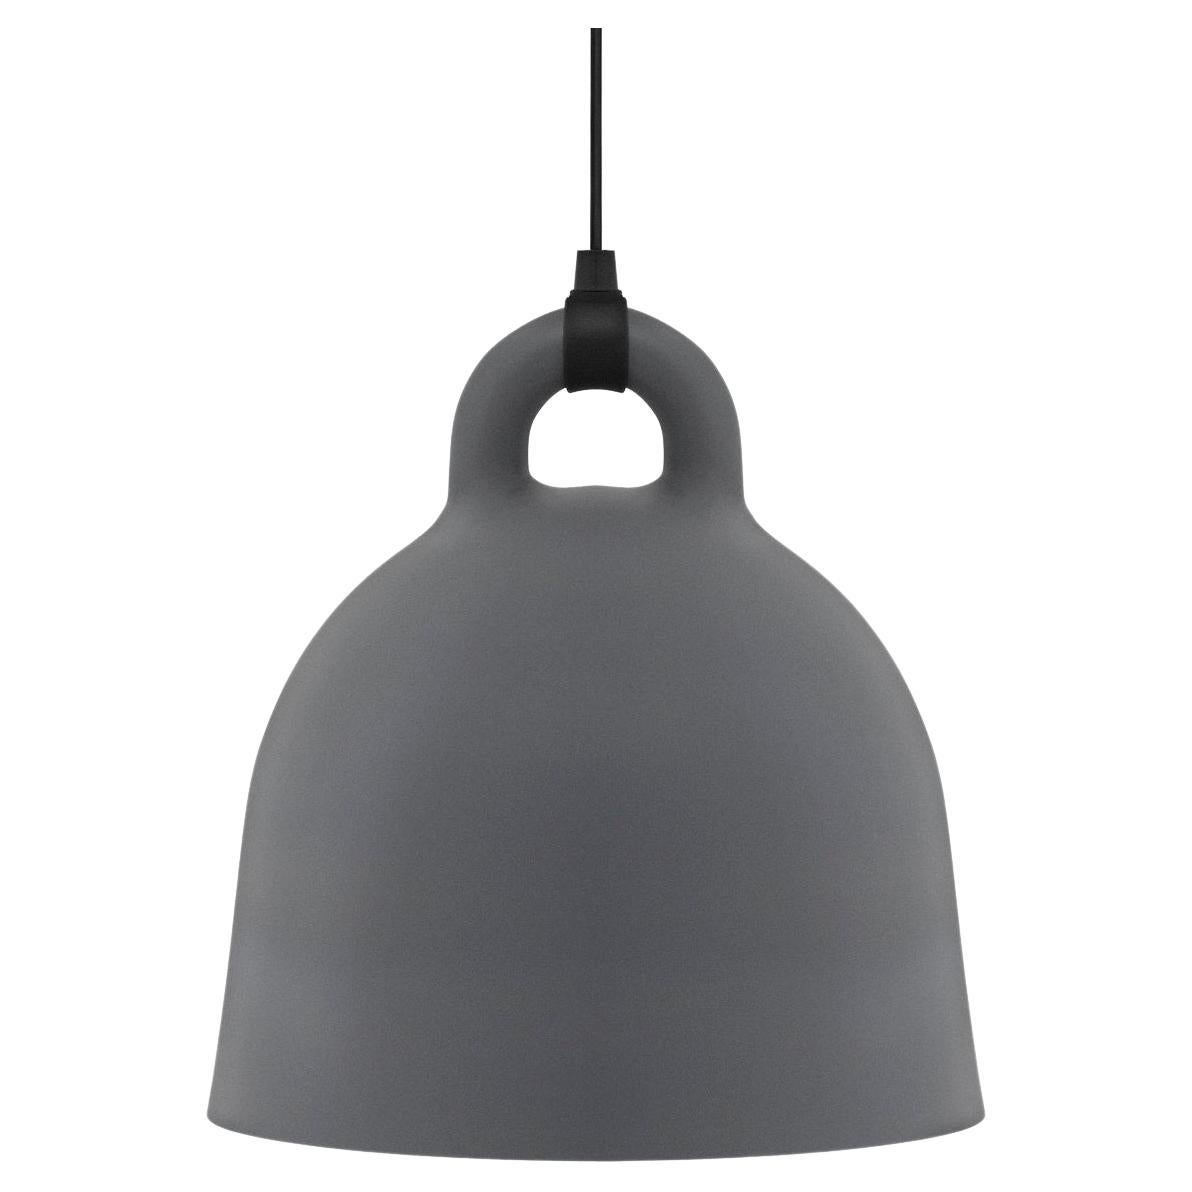 Bell lamp in white has a white cord and white canopy. Bell lamp in black has a black cord and black canopy. Bell lamp in grey has a black cord and grey canopy. Bell lamp in sand has a brown cord and sand canopy. All Bell lamps come with a 4 m